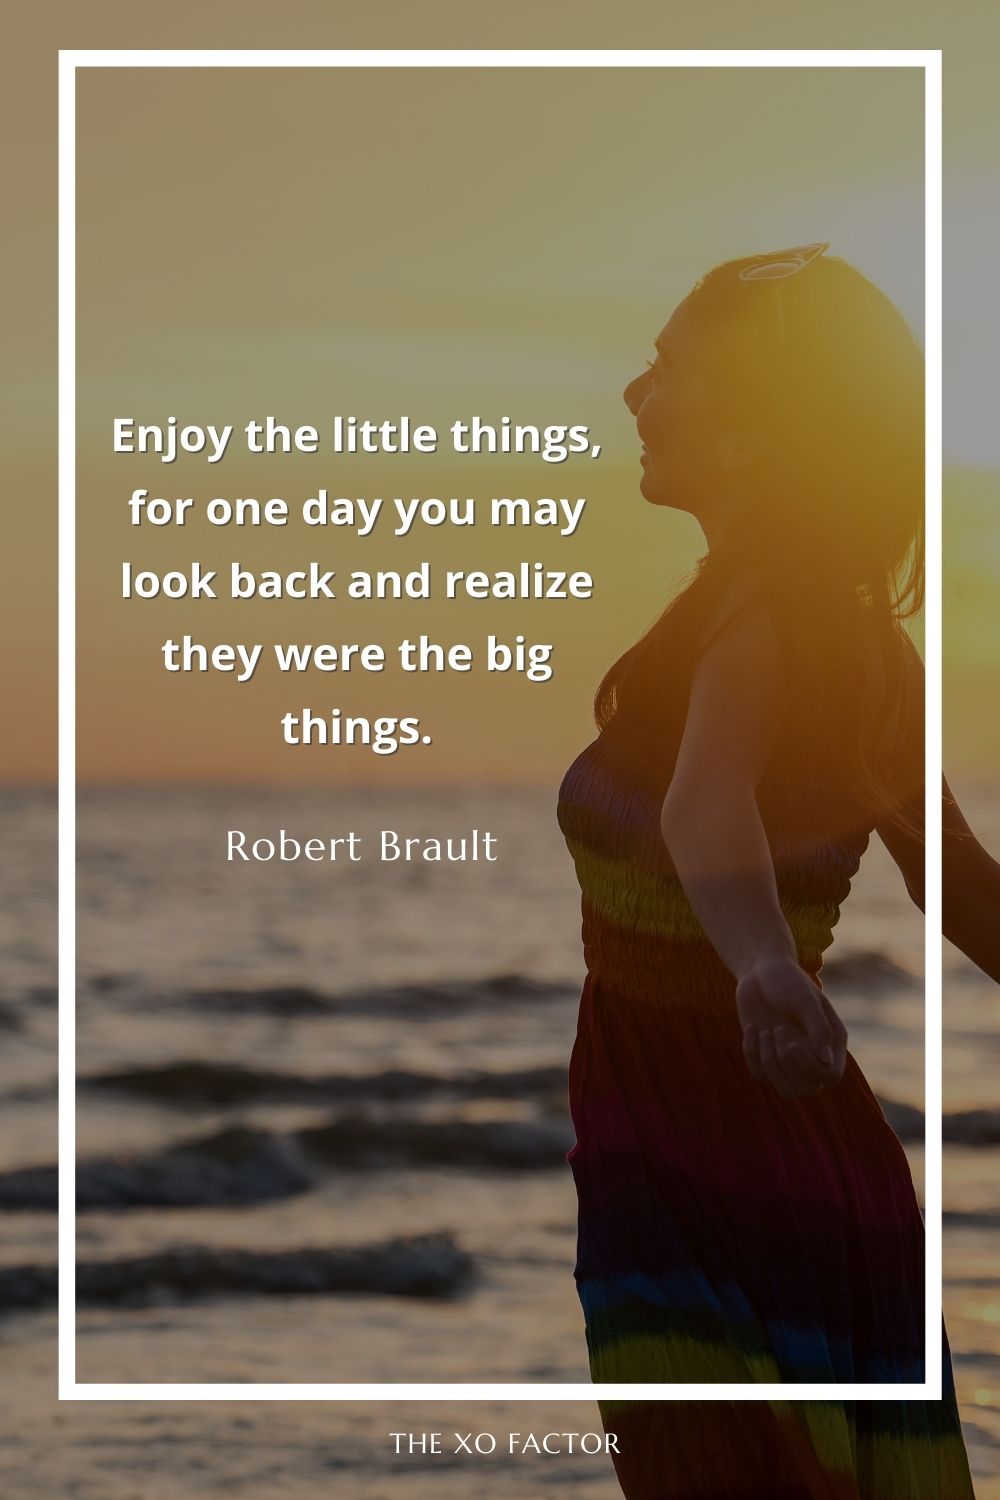 Enjoy the little things, for one day you may look back and realize they were the big things.